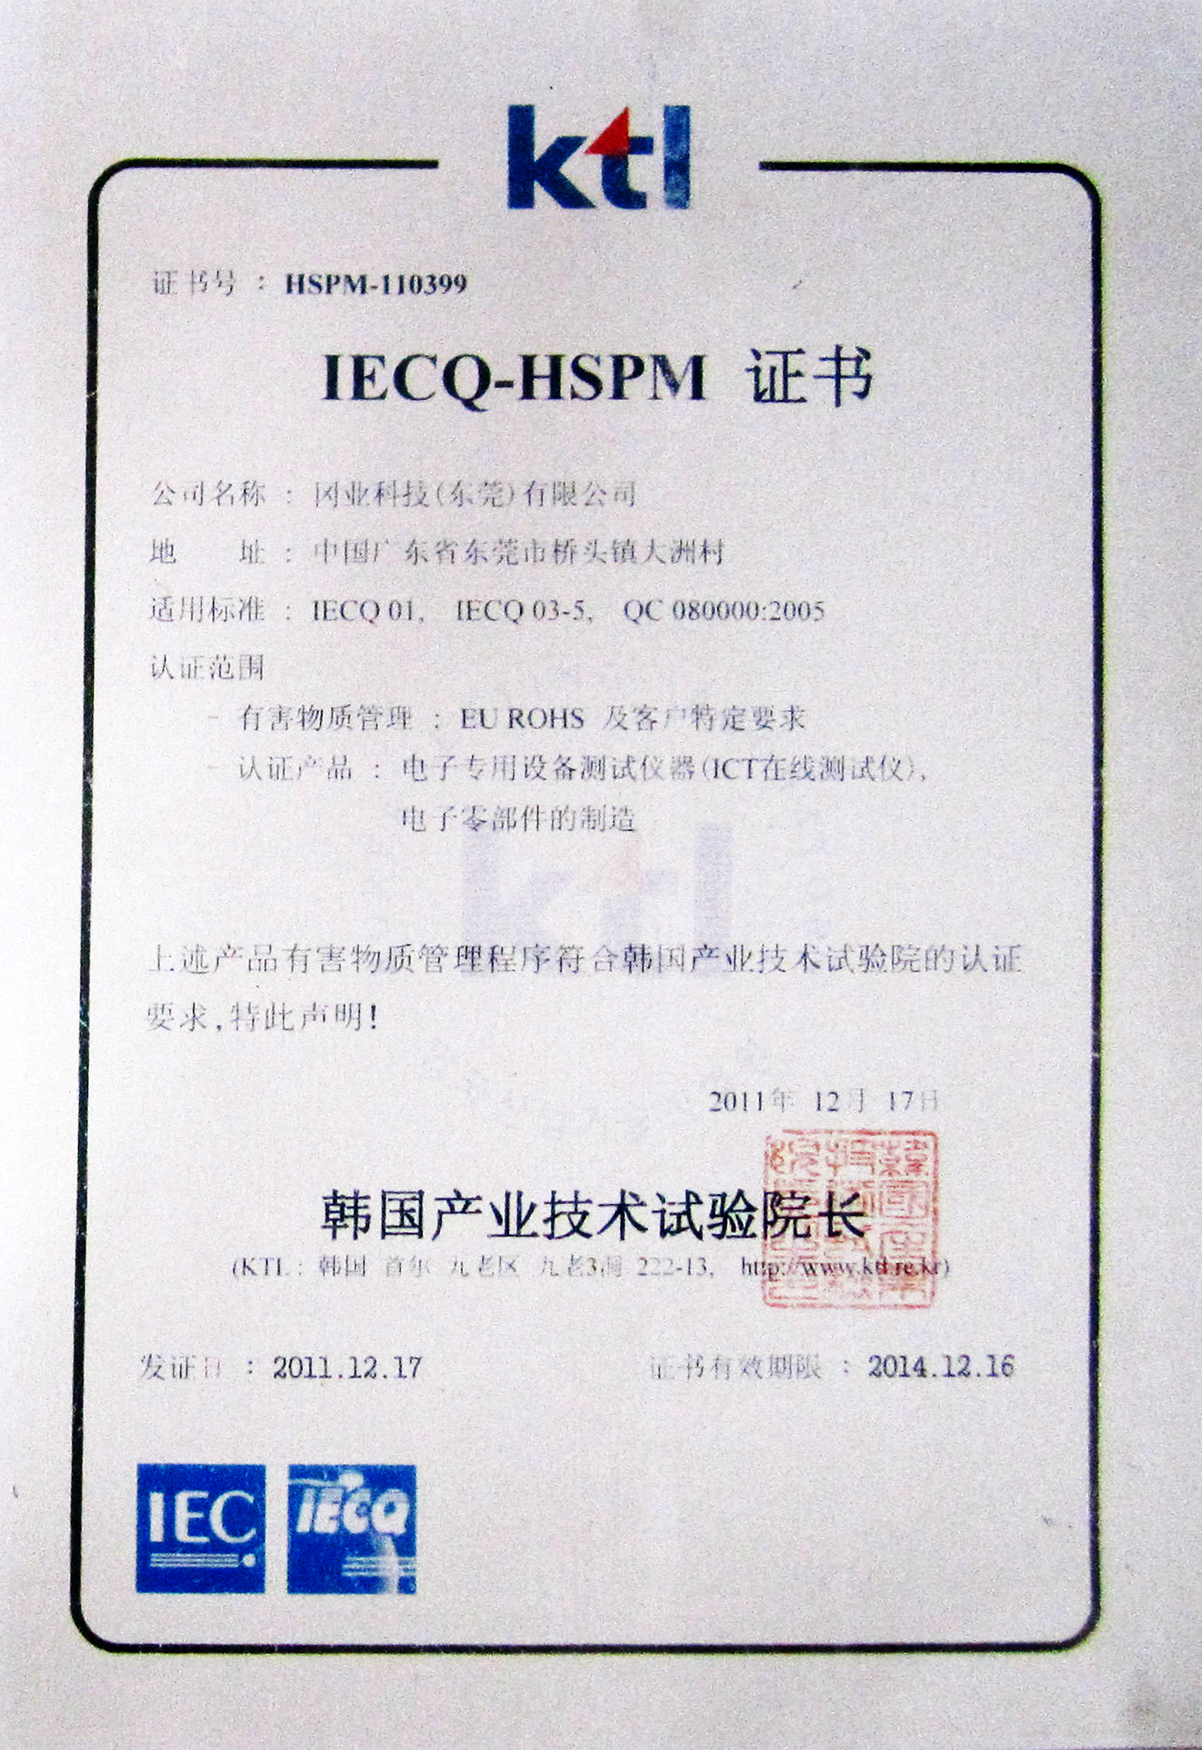 This is certificate of QC O8000 Chinese language for OKTEK smt pcba second manufacturer